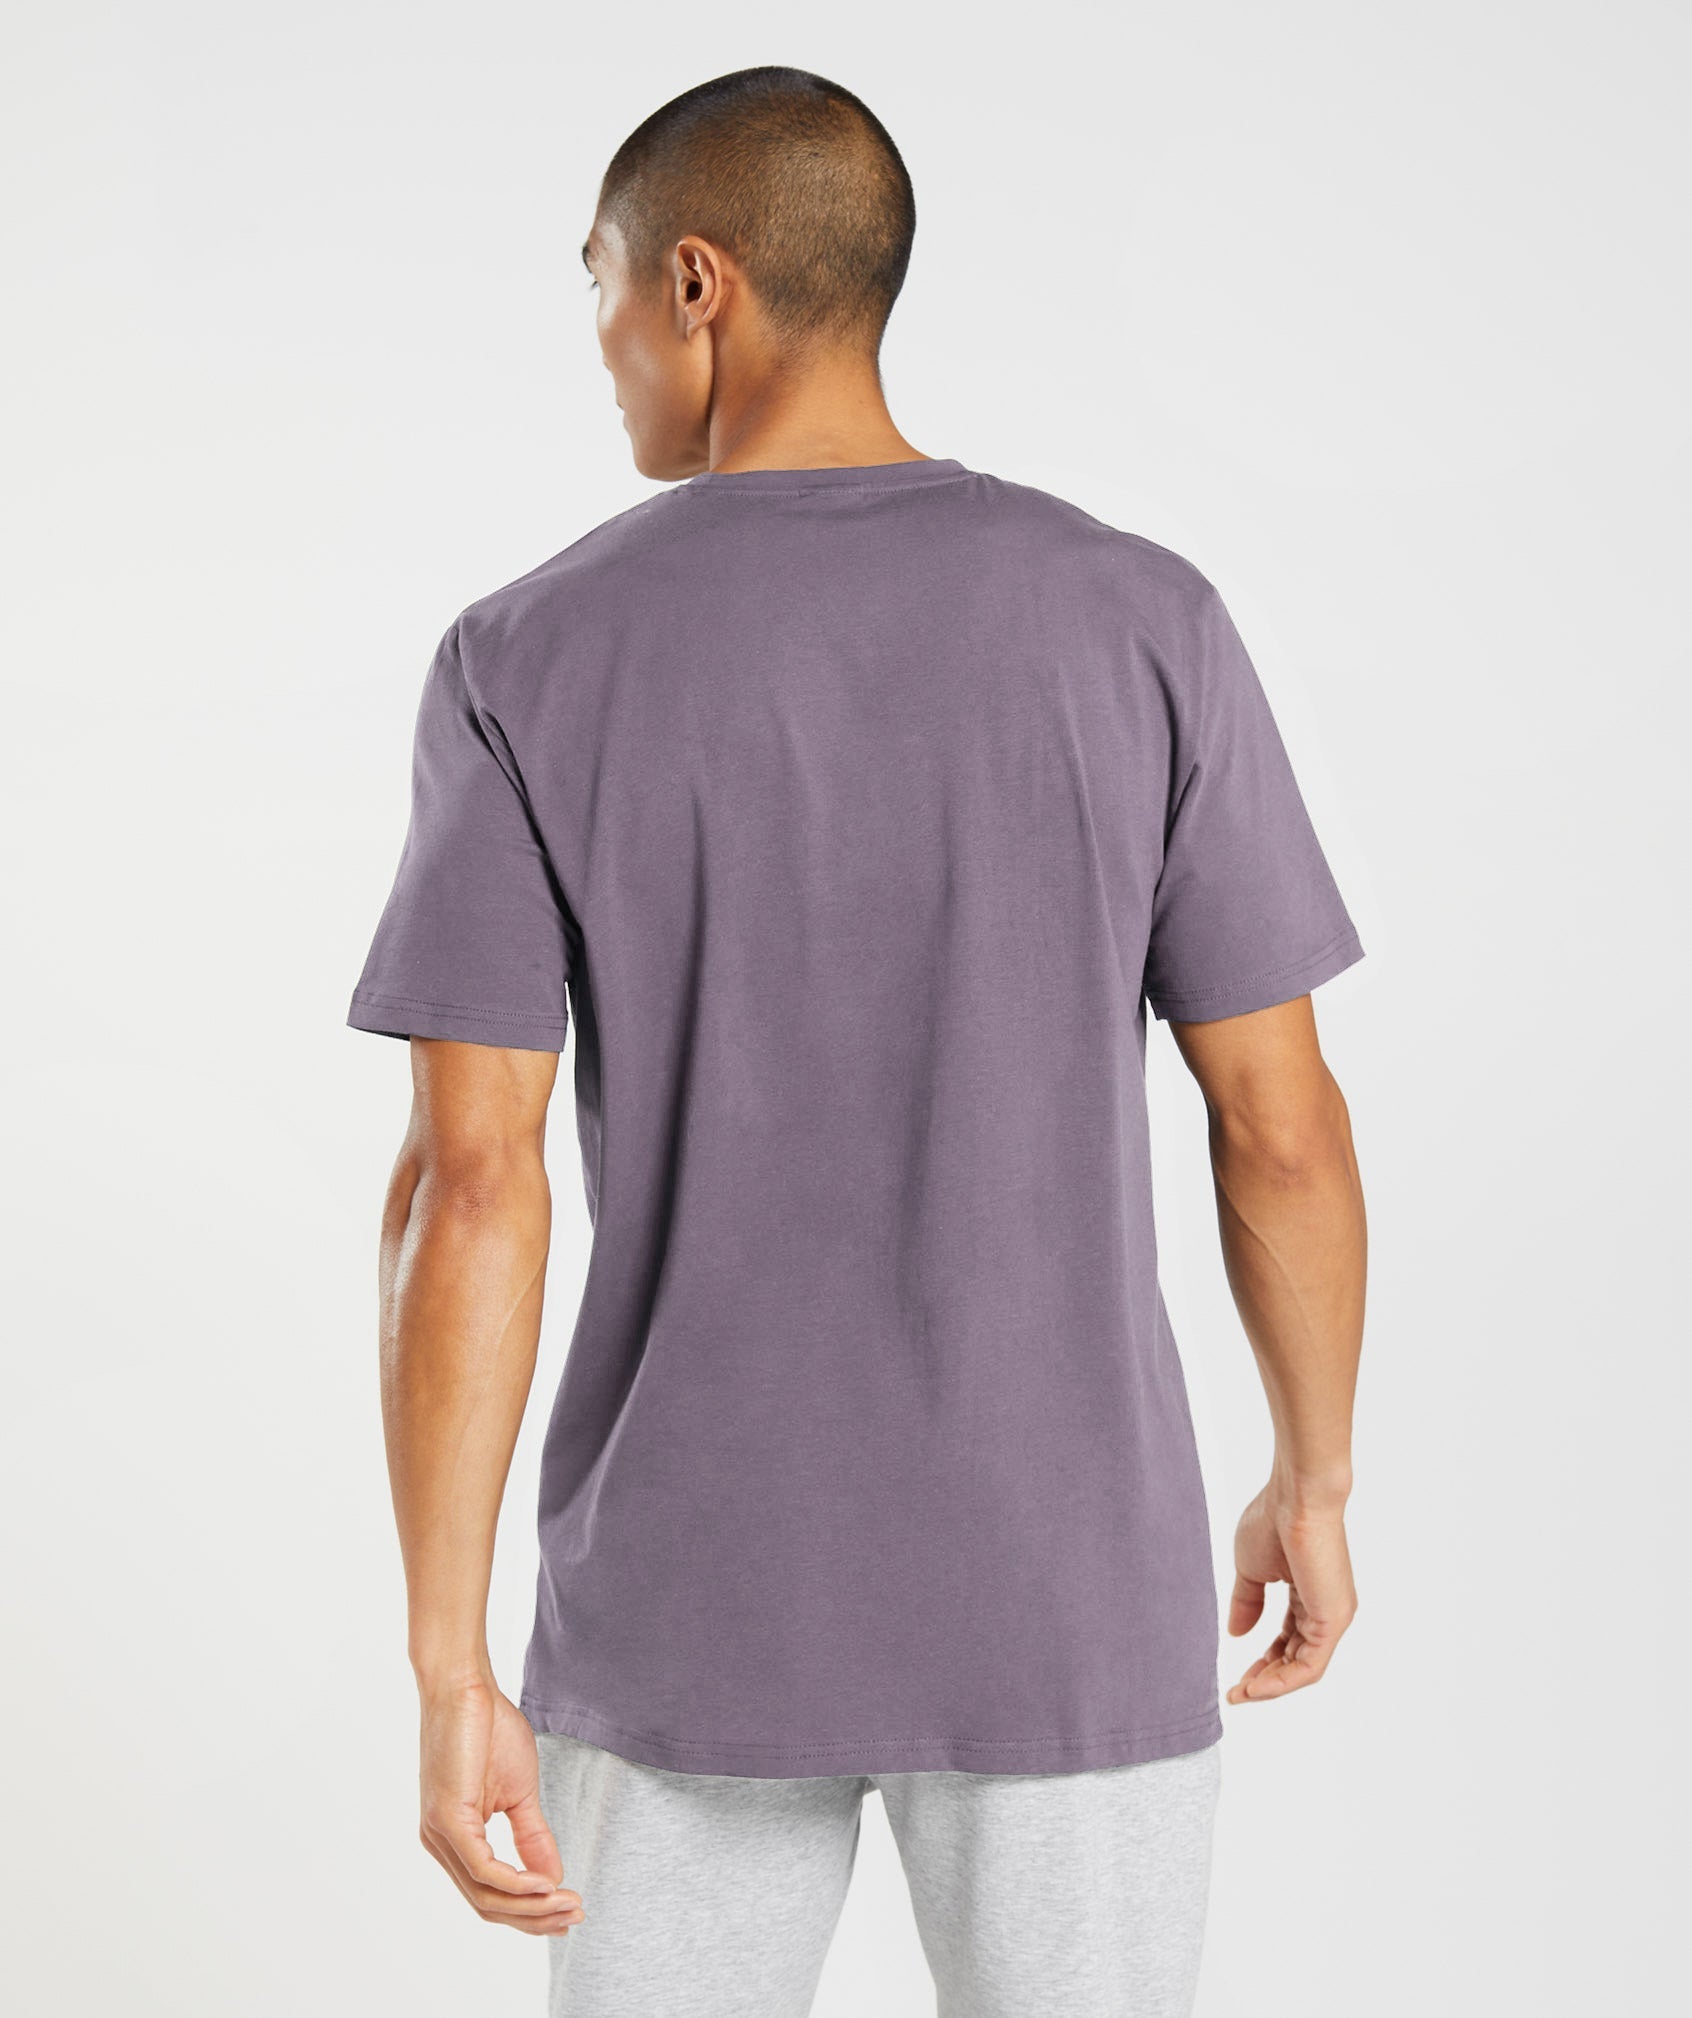 Outline T-Shirt in Musk Lilac - view 2